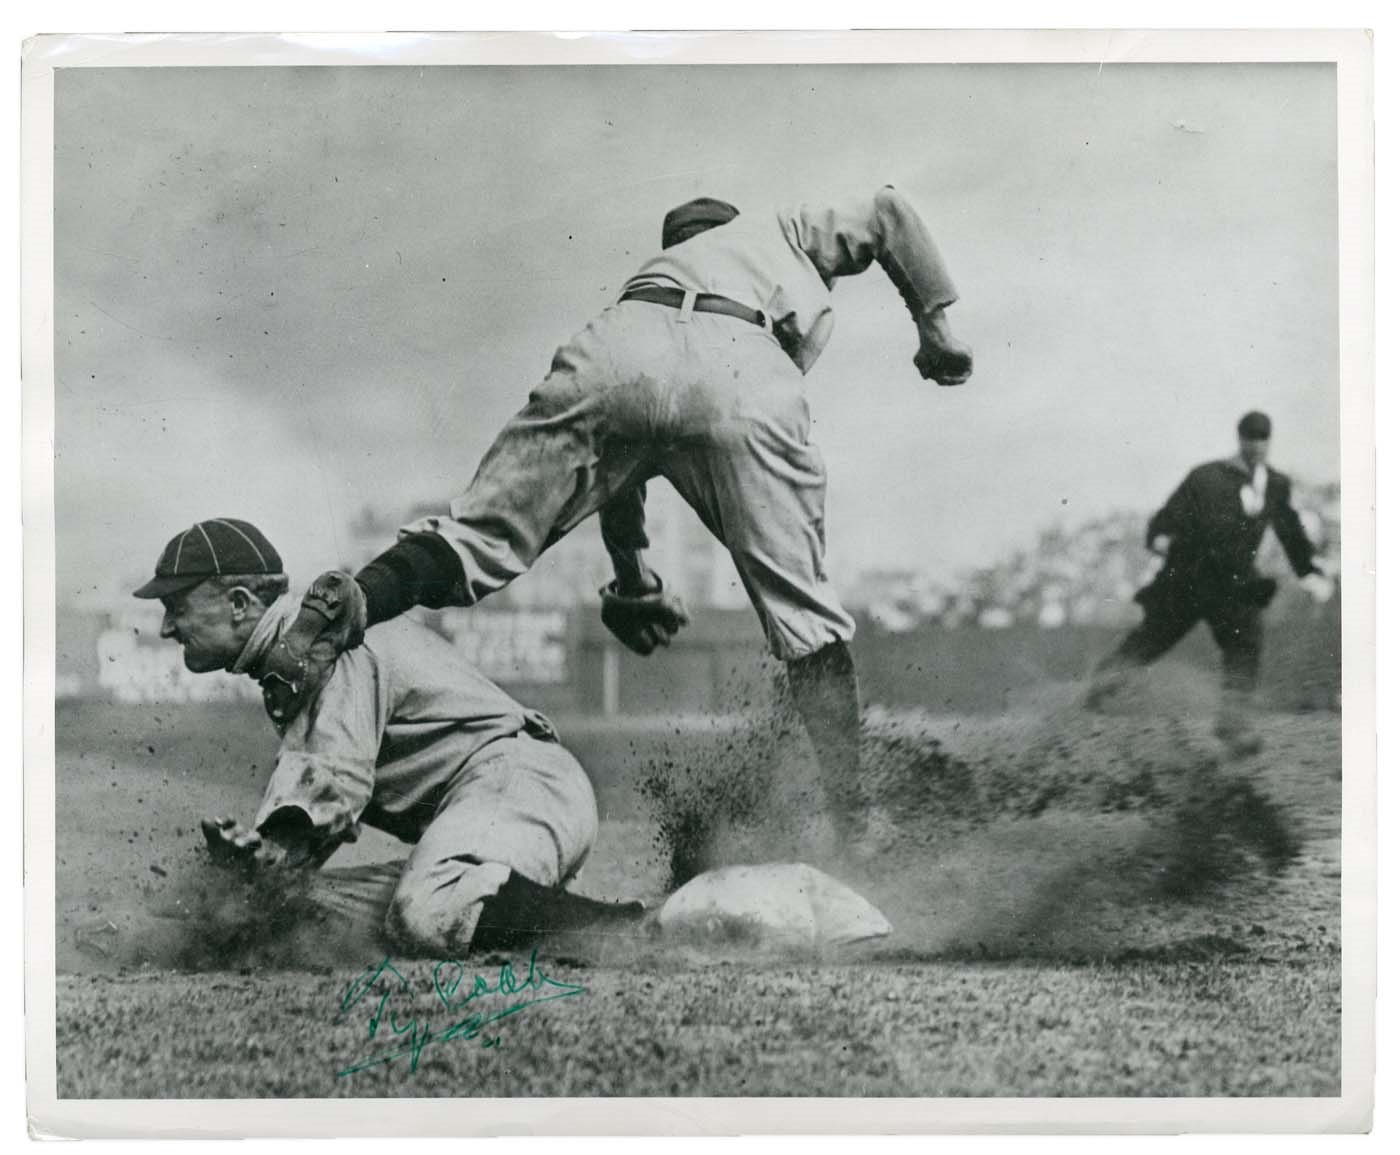 The Holy Grail of Signed Photographs - Ty Cobb "Sliding Into Third" by Charles Conlon (PSA & JSA)